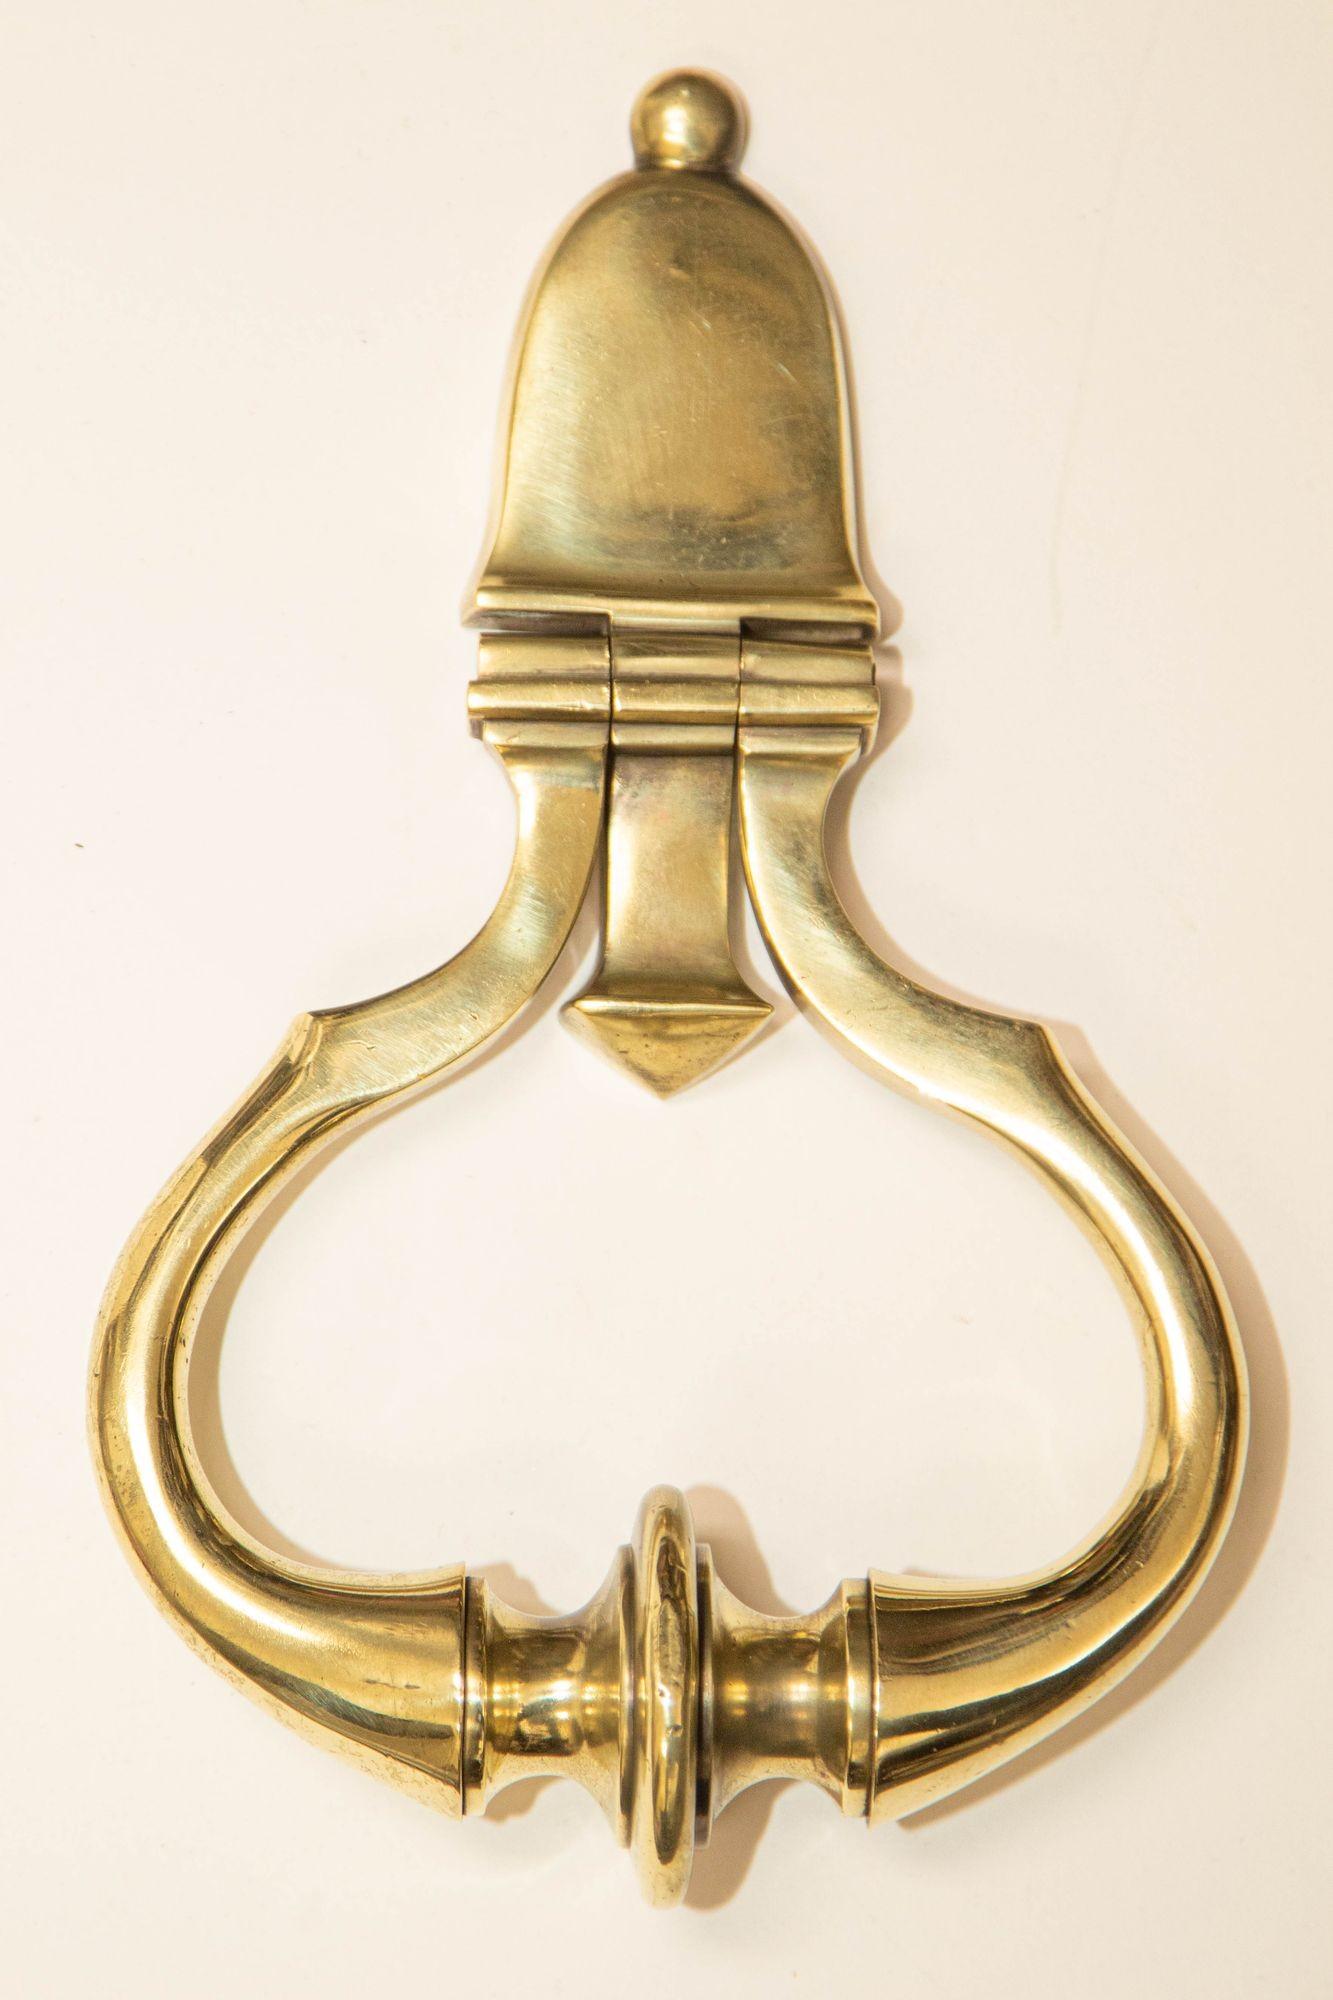 A large solid cast polished brass door knocker sophisticated in shape and design.
A substantial Georgian style early twentieth century brass door knocker.
The piece was acquired from an estate in Beverly Hills, California.
A wonderful piece, either